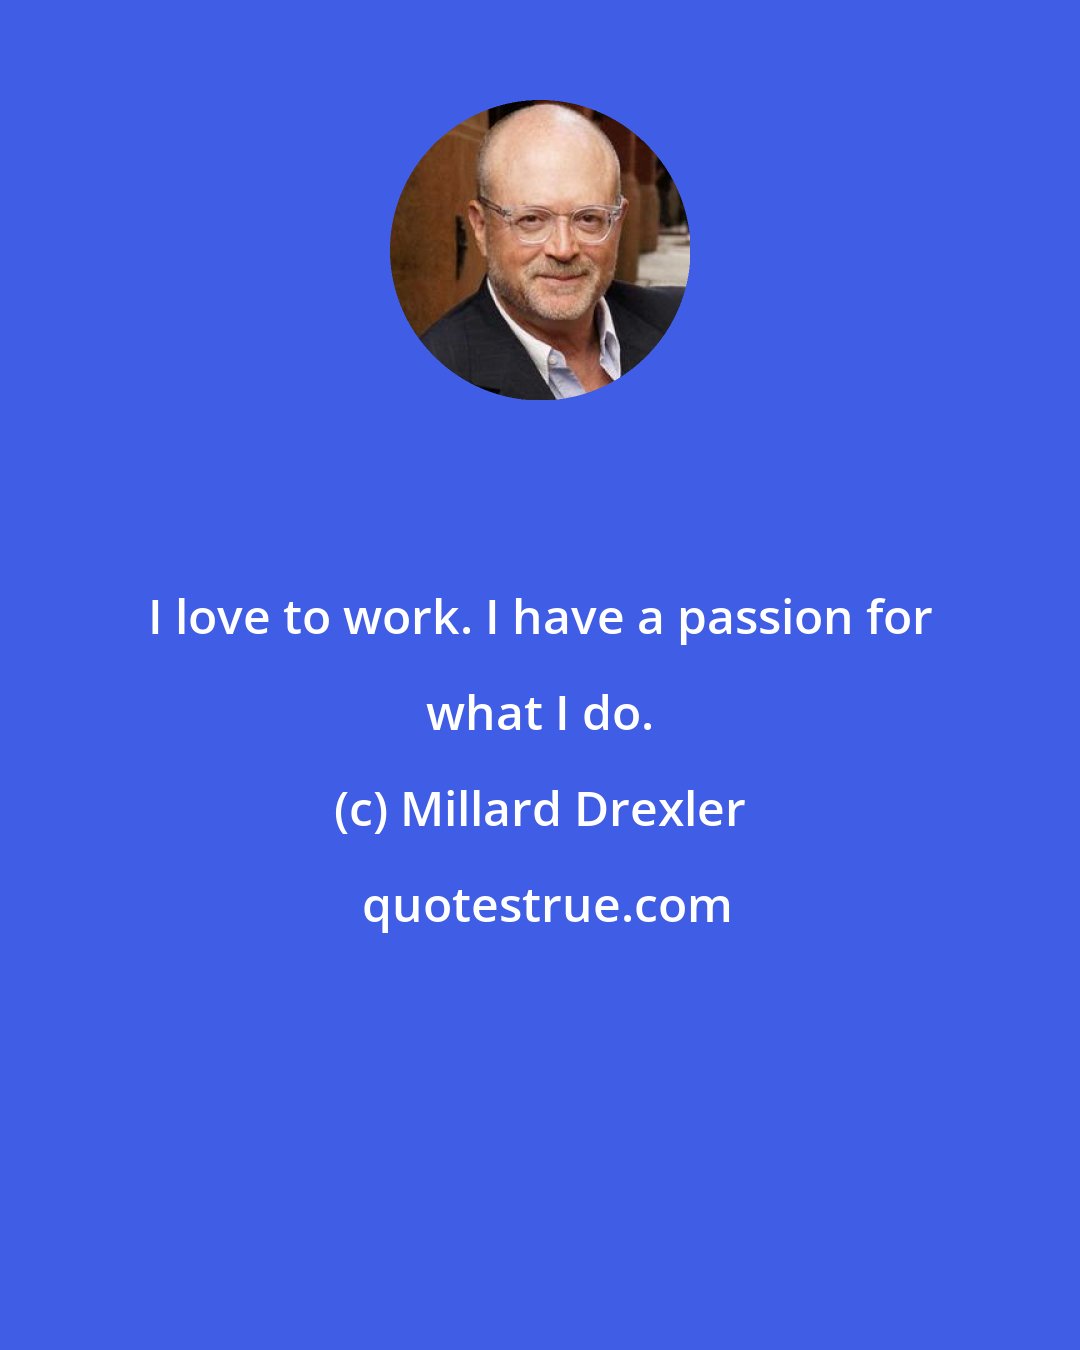 Millard Drexler: I love to work. I have a passion for what I do.